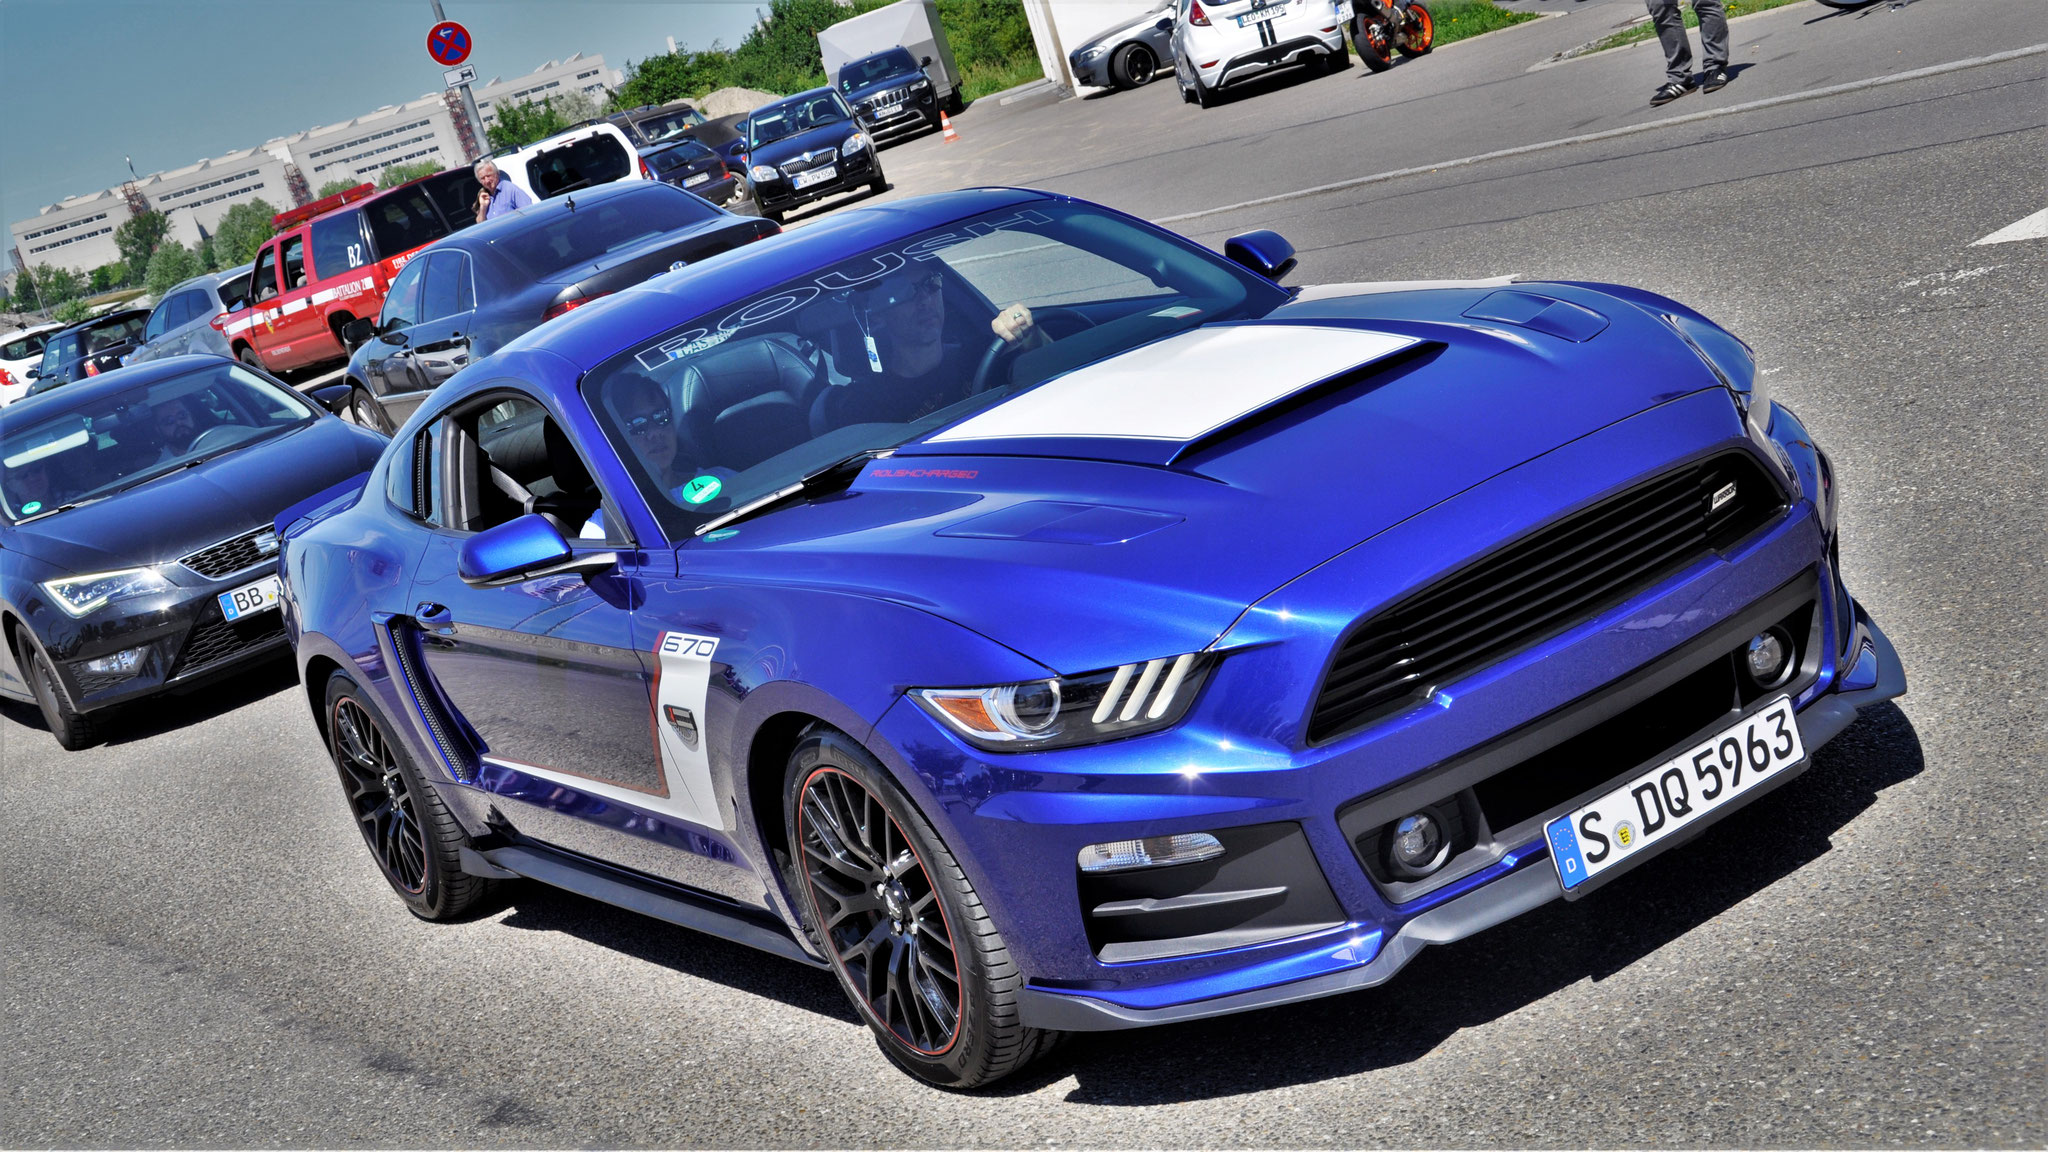 Ford Mustang Rush Warrior 670 - S-DQ5963